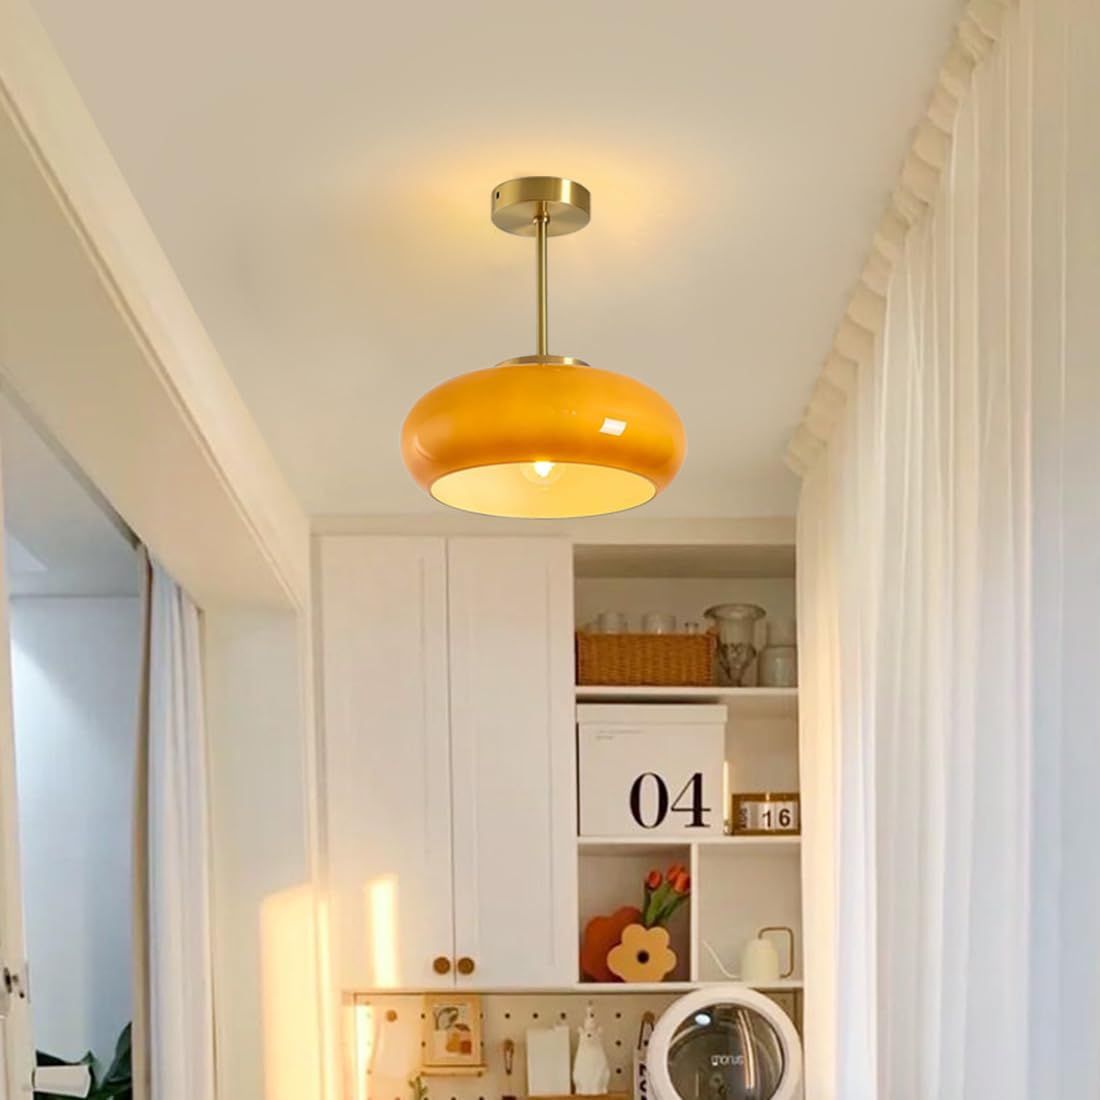 How to Update Your Home Decor with New
Ceiling Light Shades